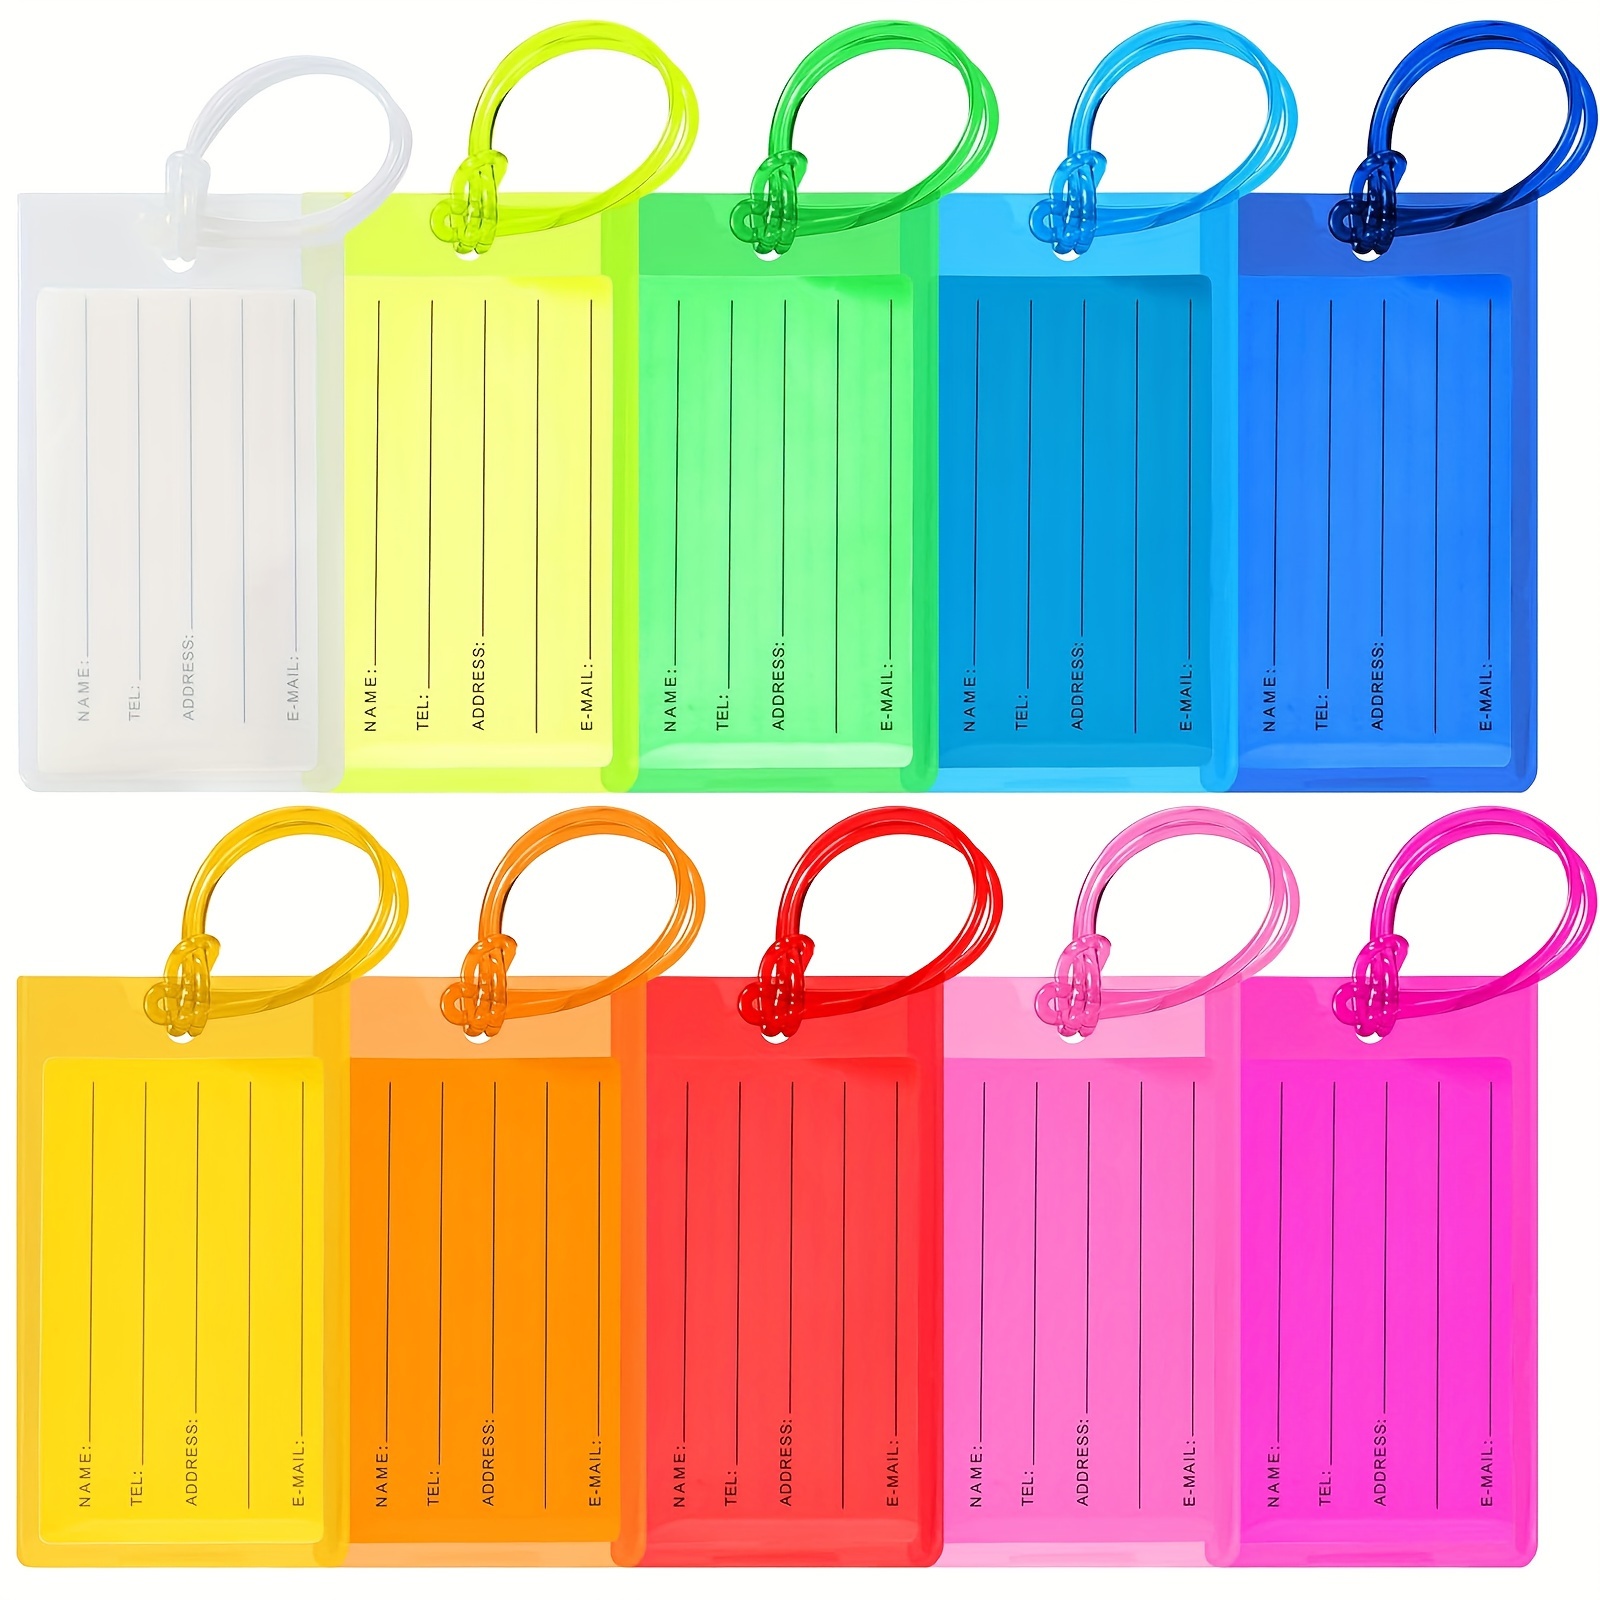 

5/10pcs Luggage Tags, Colorful Flexible Travel Luggage Tags, Travel Bag & Baggage Id Label Tags, Travel Essentials (mixed Colors)